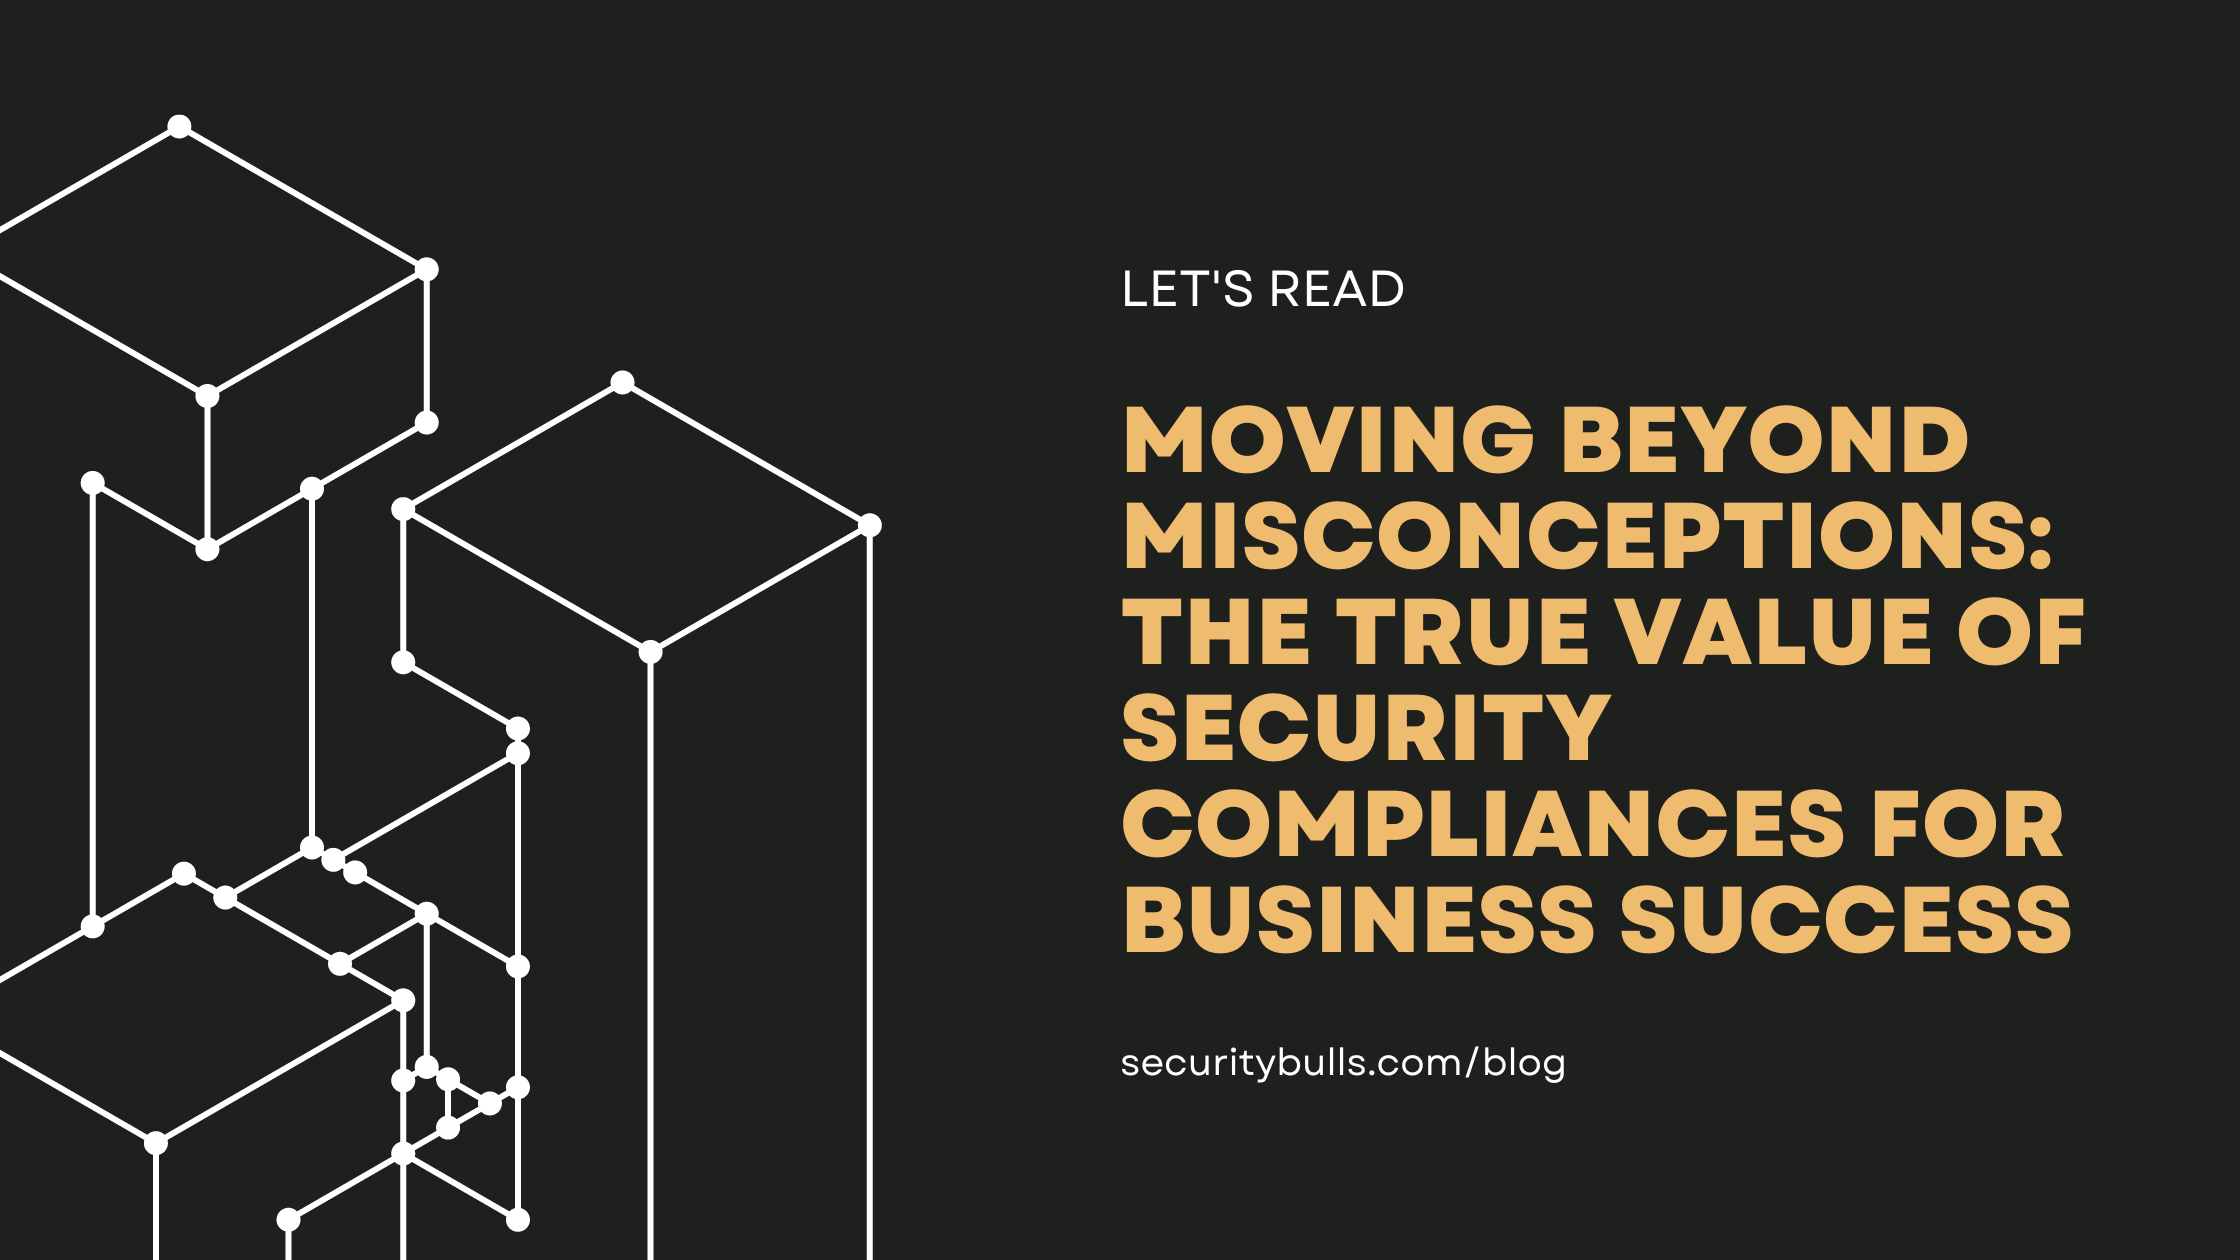 Moving Beyond Misconceptions: The True Value of Security Compliances for Business Success